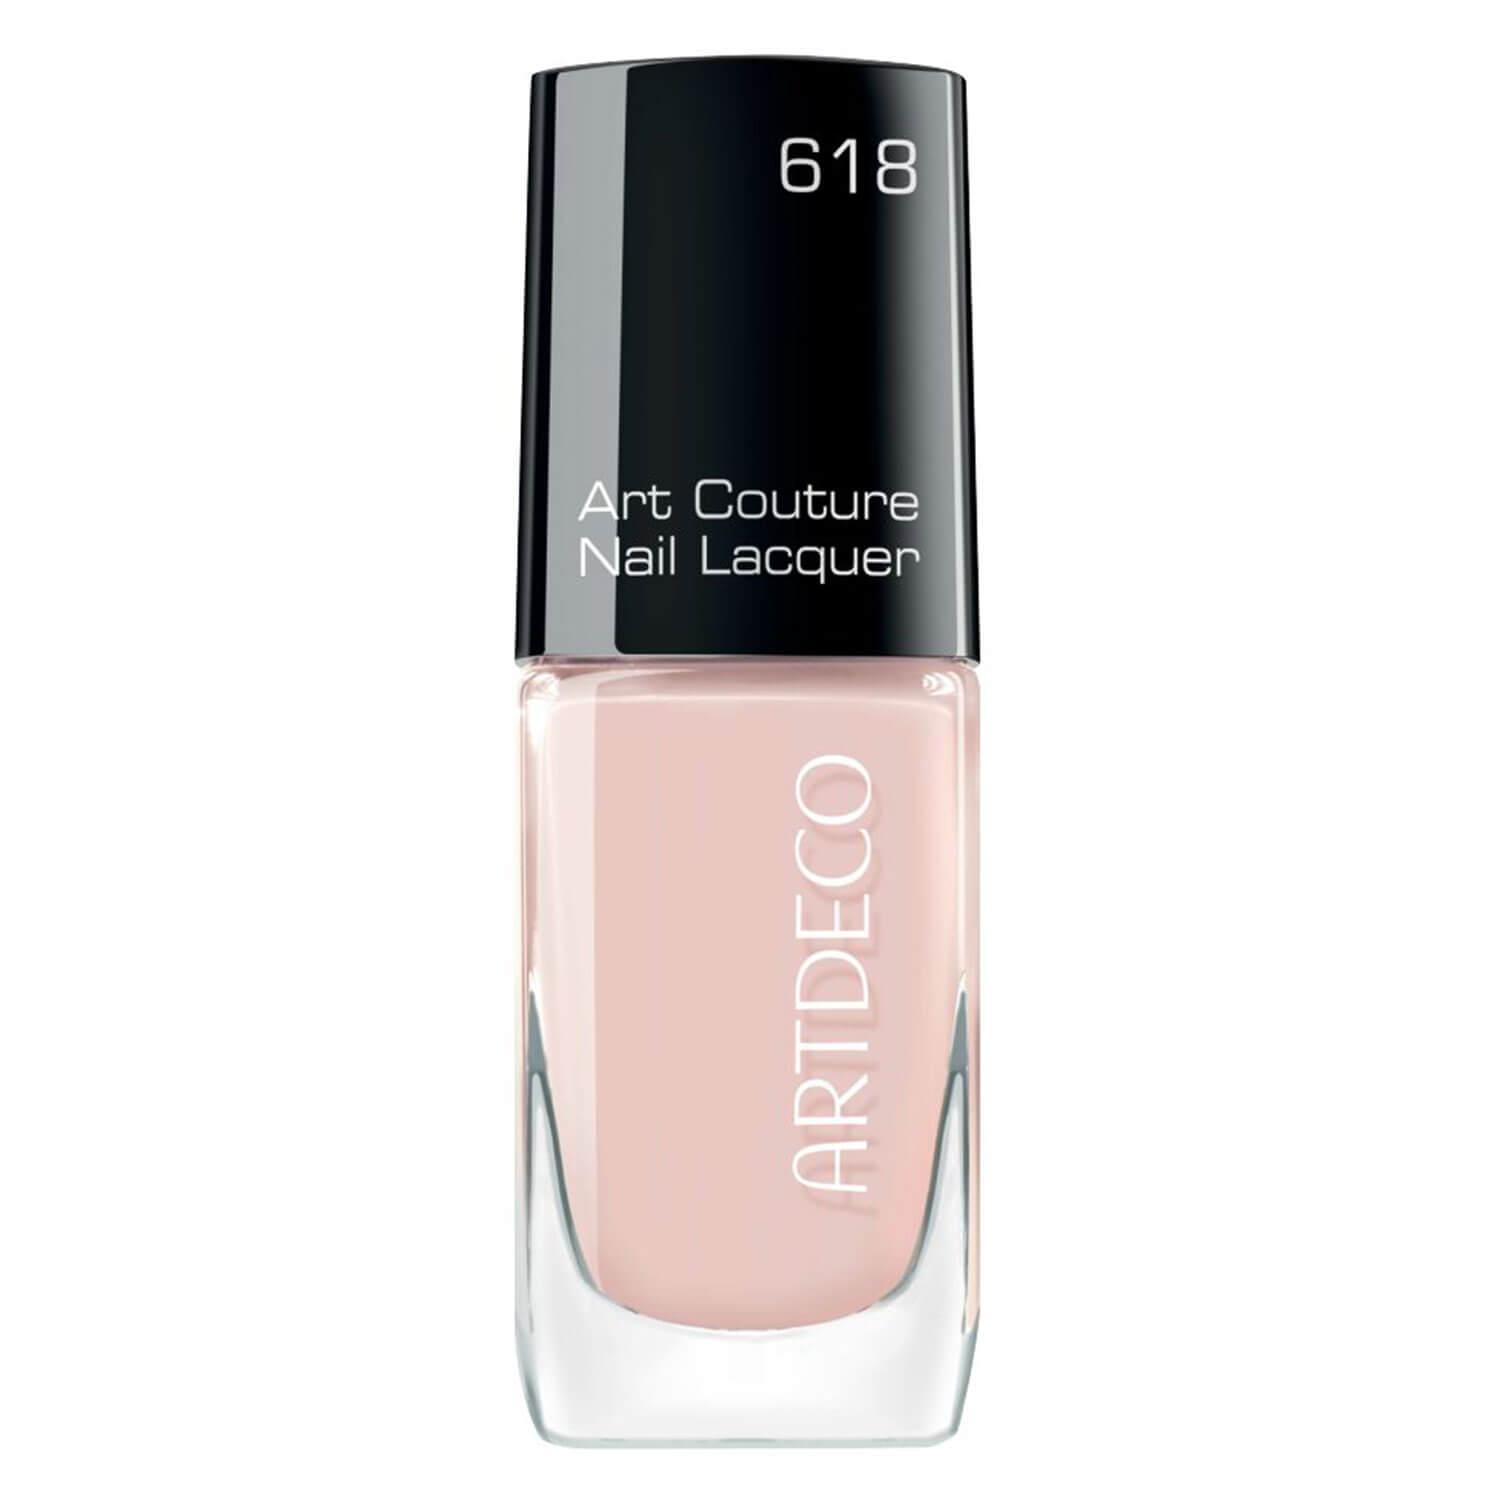 Art Couture - Nail Lacquer Orchid White 618